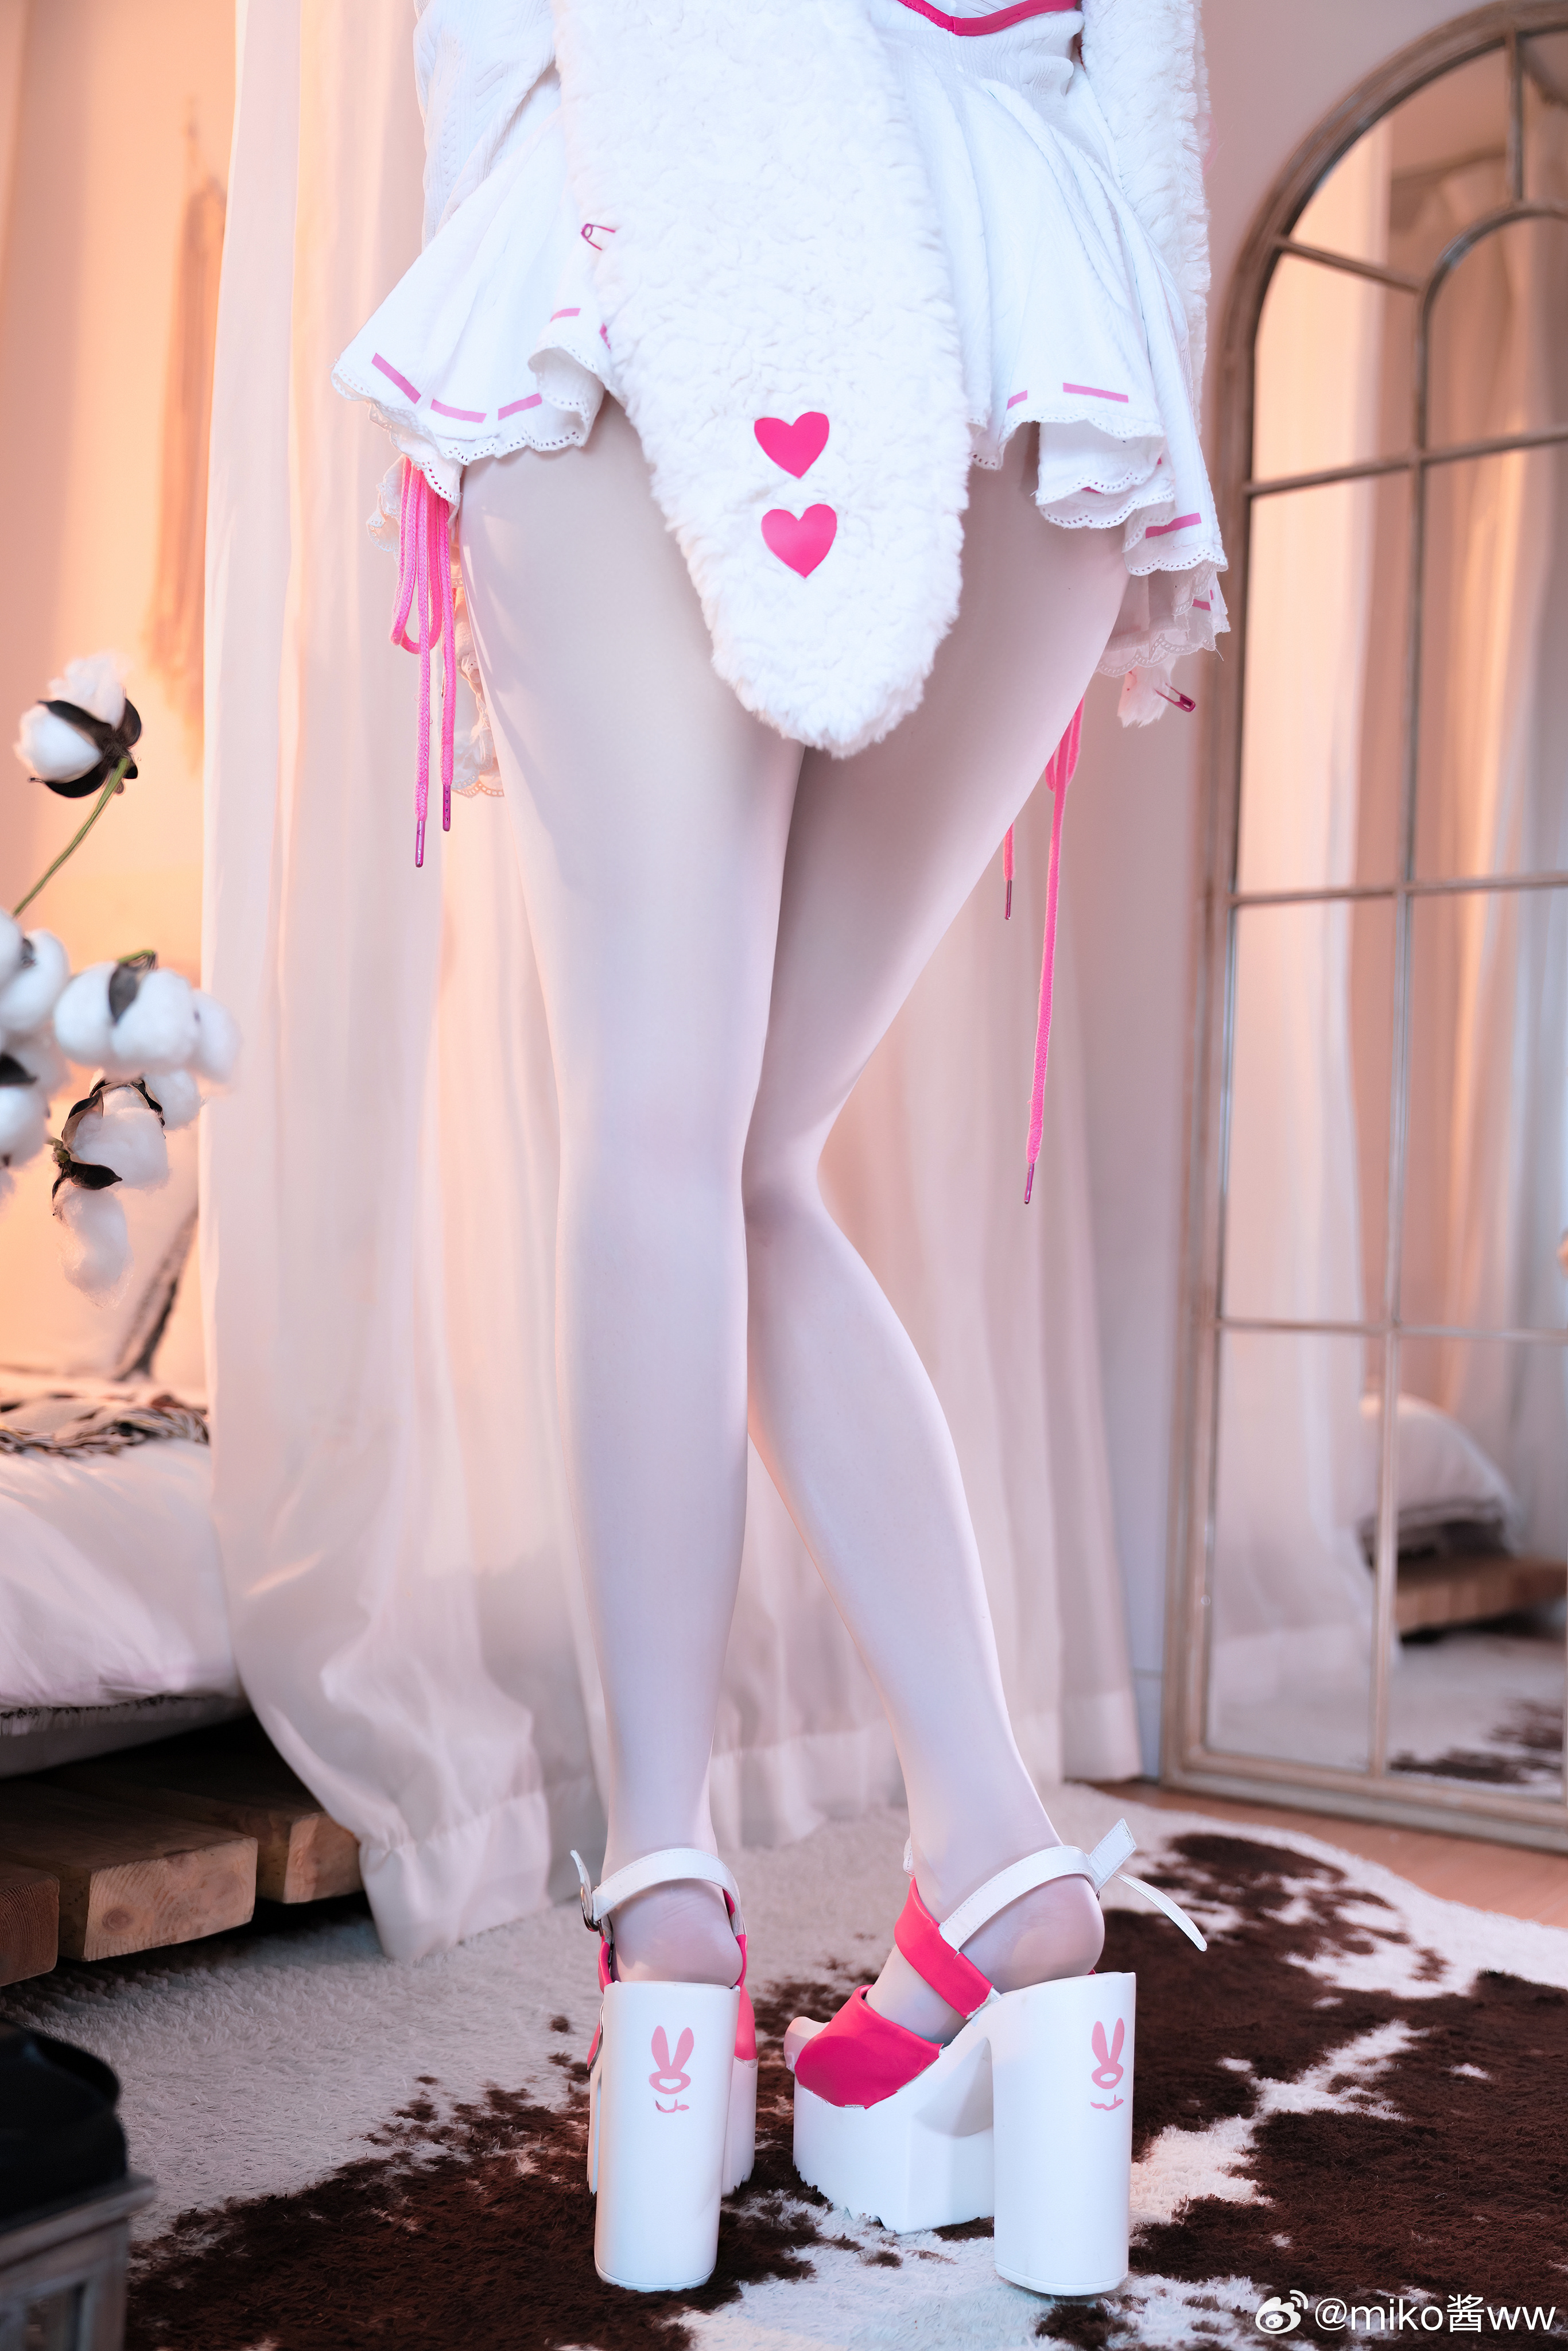 People 2732x4096 Miko Sauce cosplay Asian low-angle indoors women indoors standing women watermarked curtains platform high heels heels mirror reflection wood bed pillow white pantyhose pantyhose anime girls portrait display